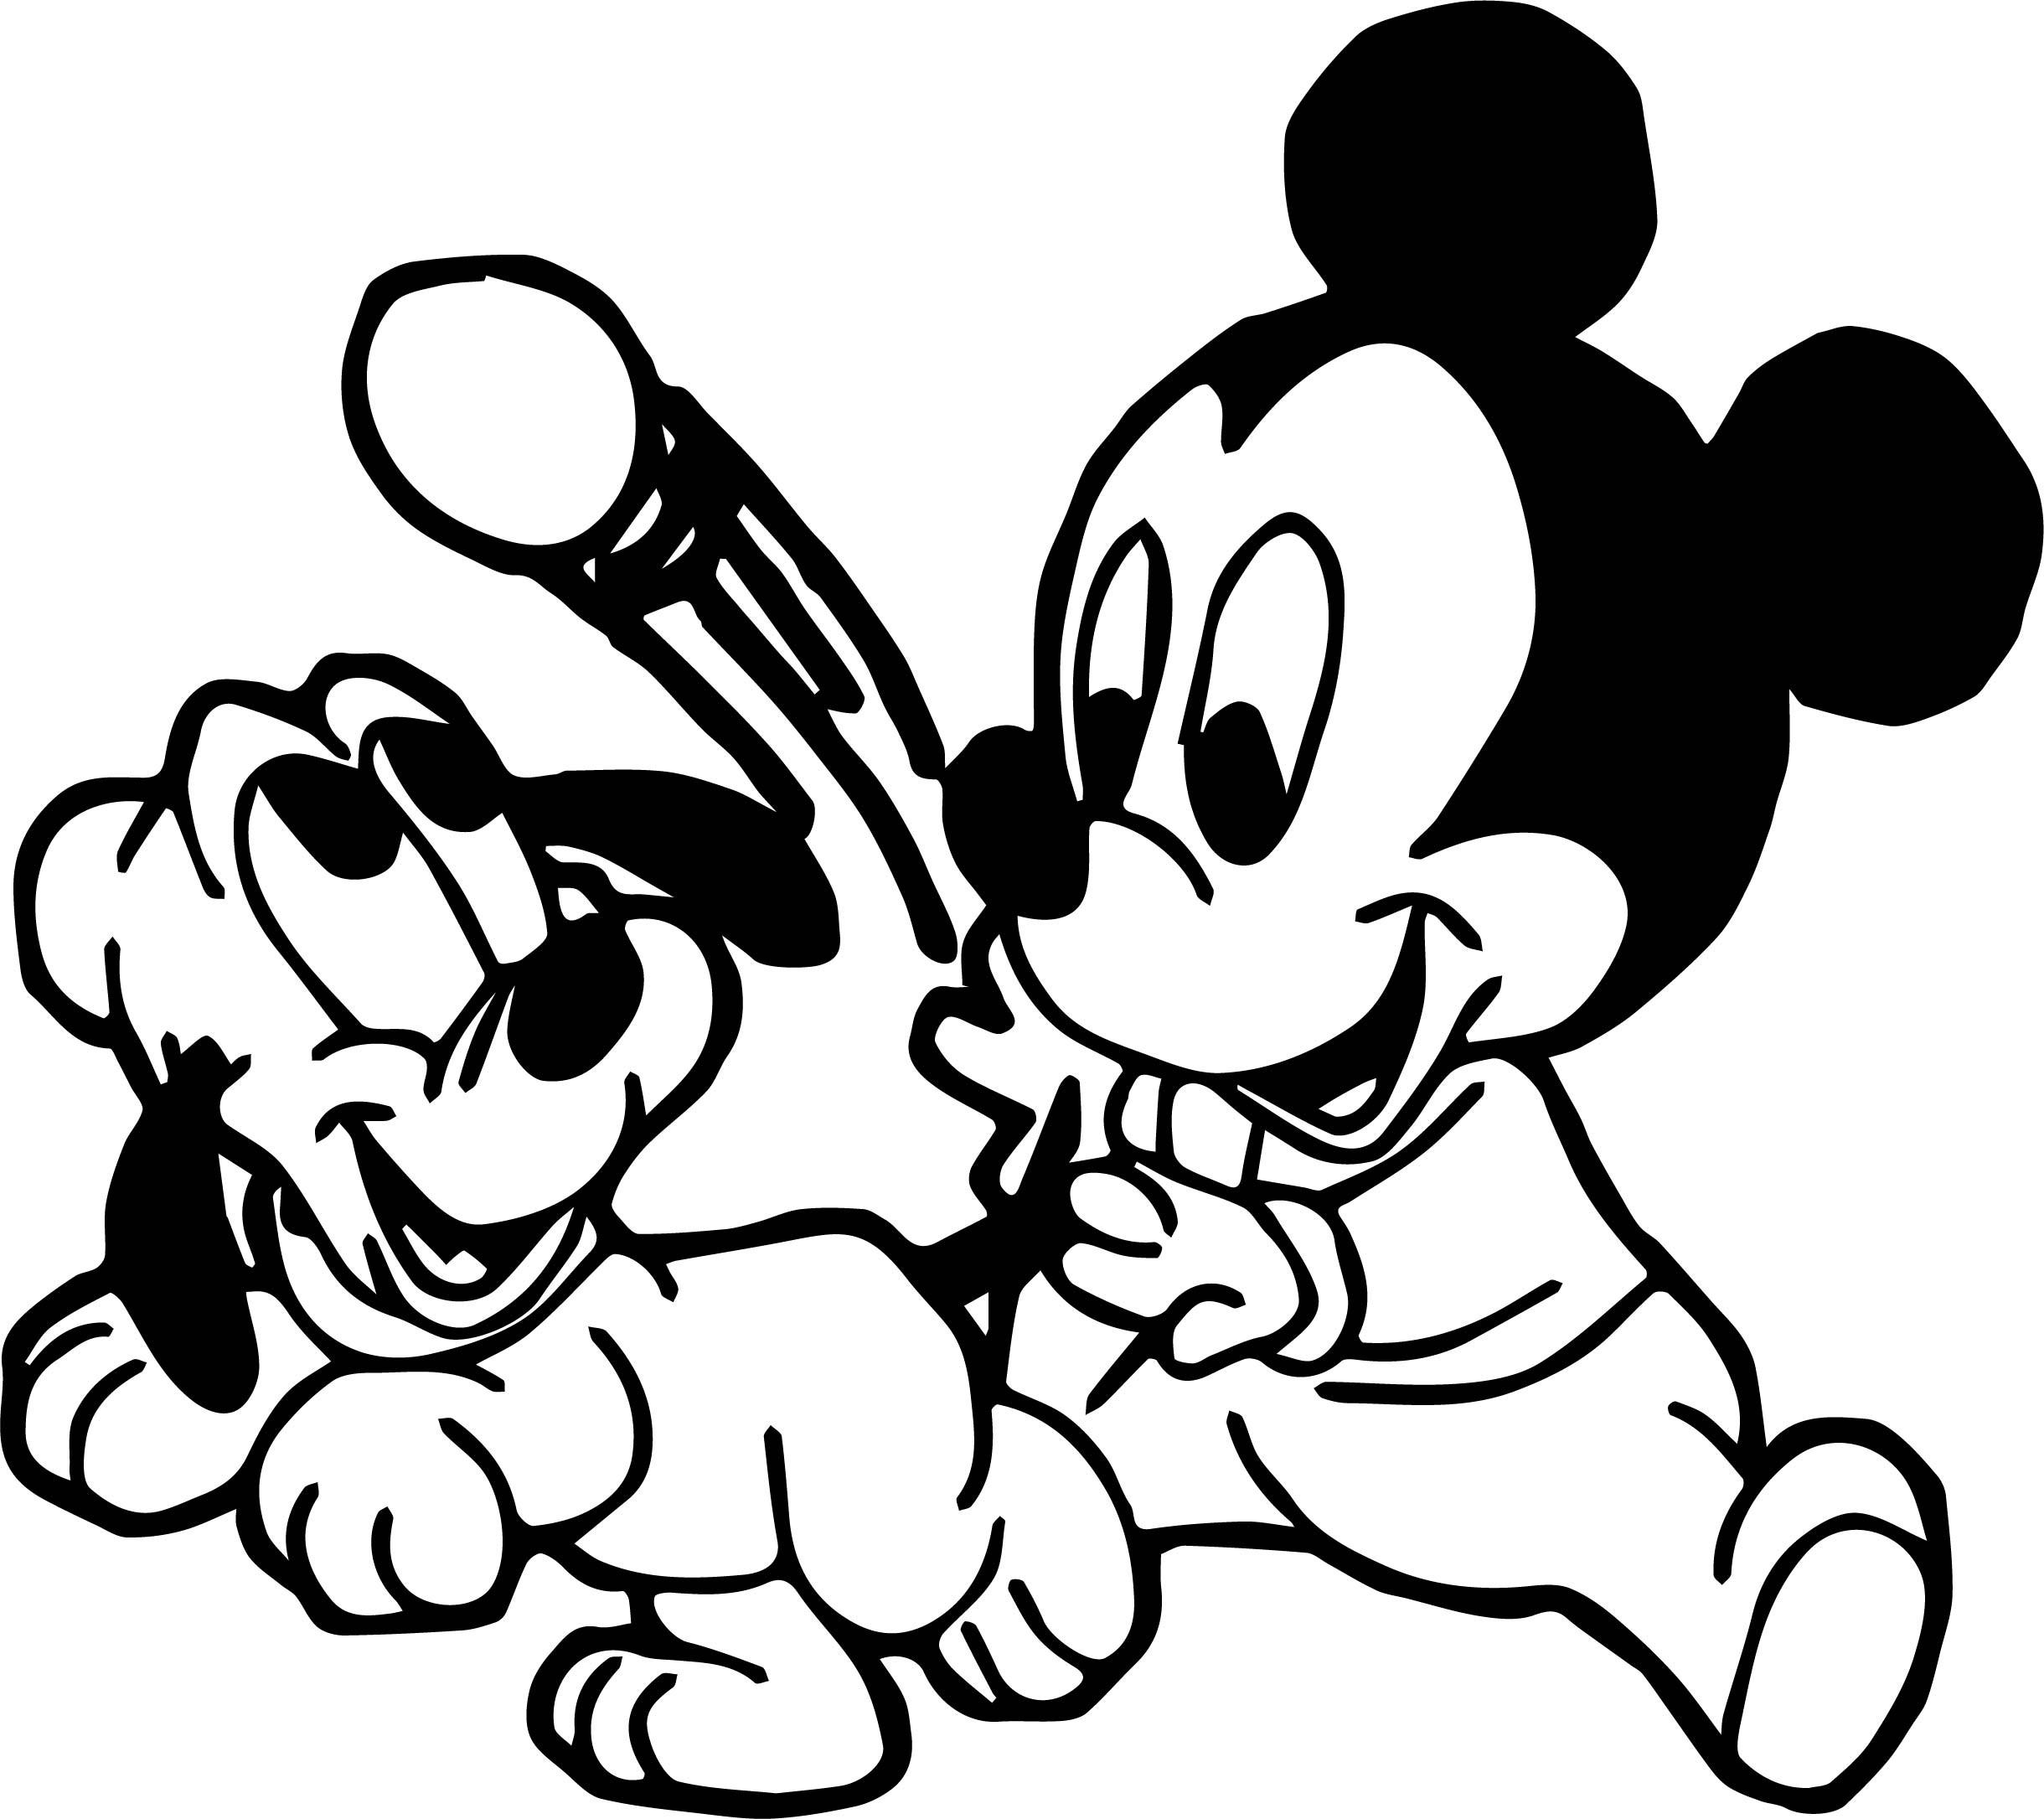 Mickey Mouse Coloring Page Coloring Pages Mickey Mouse Coloring Pages Halloween Picture